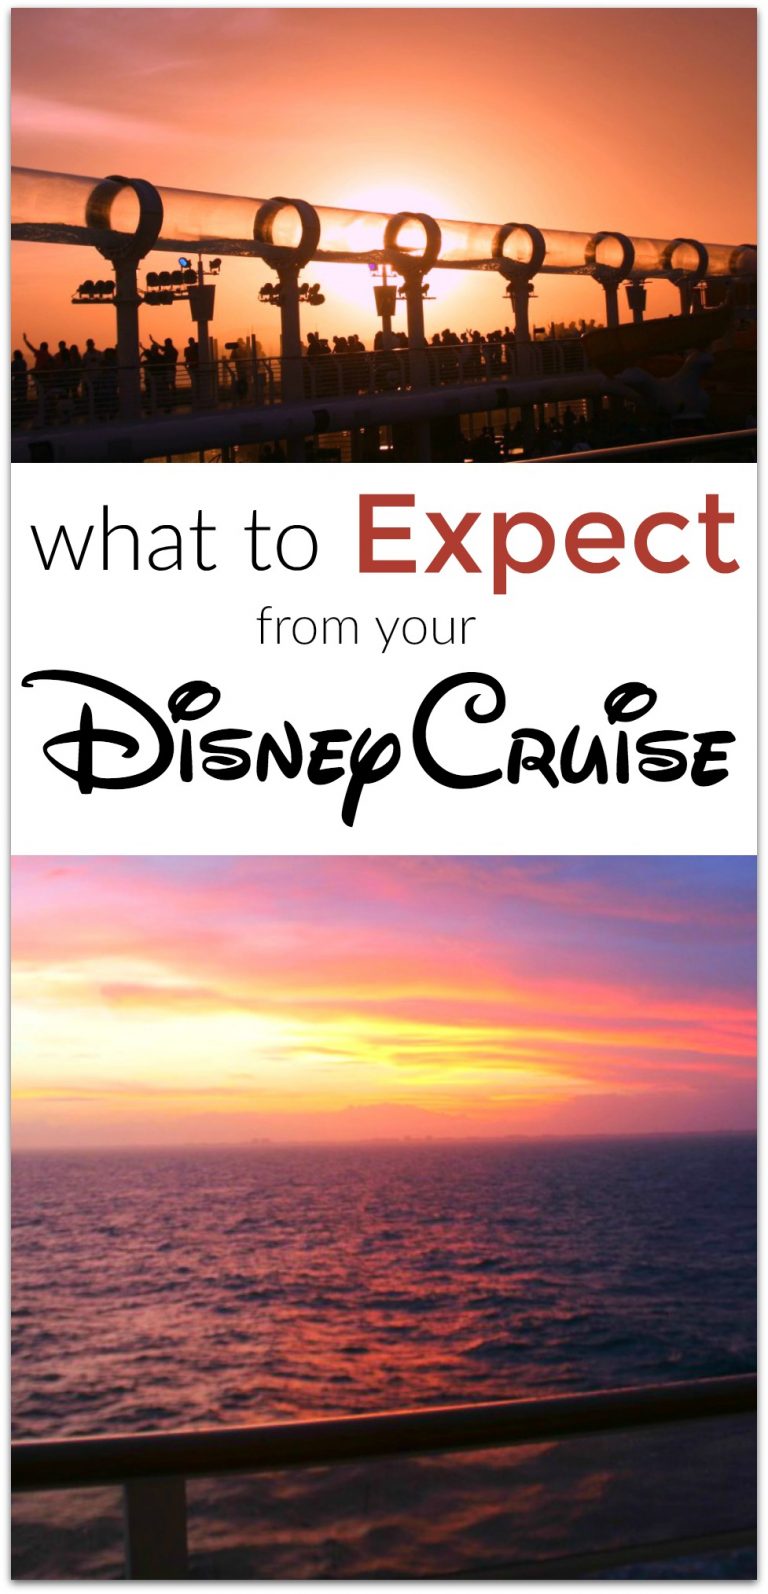 What to Expect from Your Disney Cruise